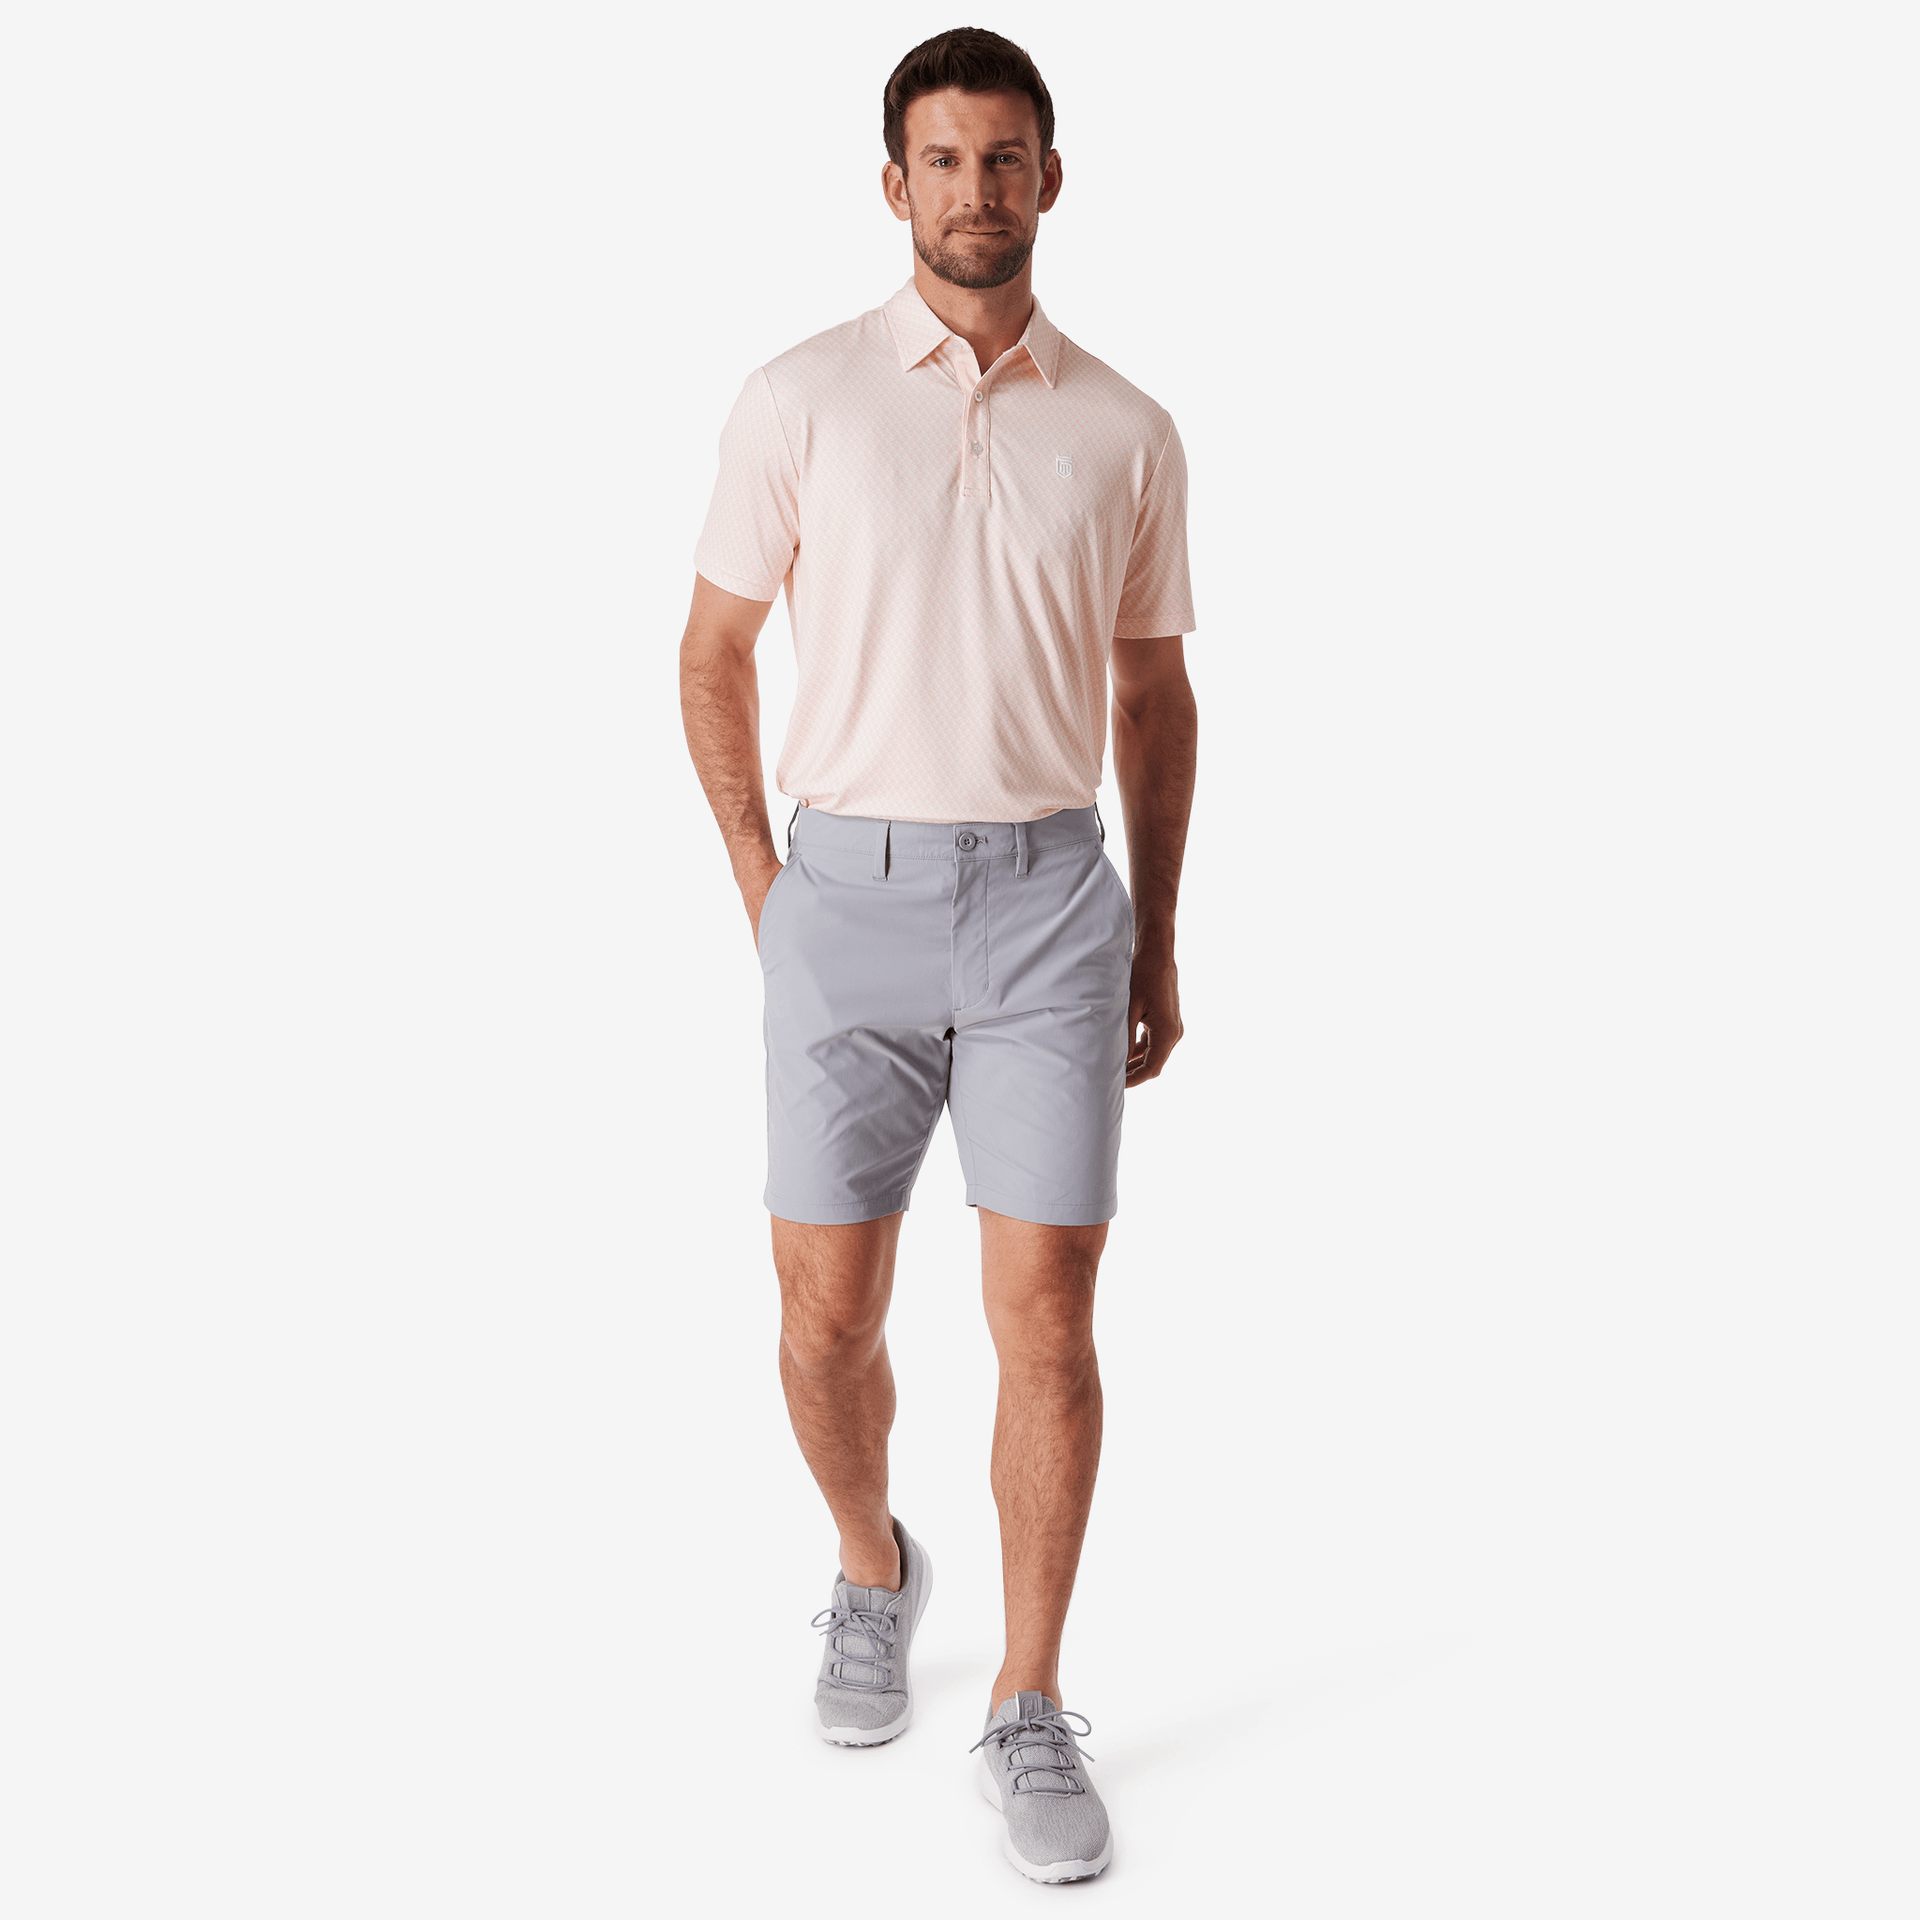 Athletic Tech Printed Polo